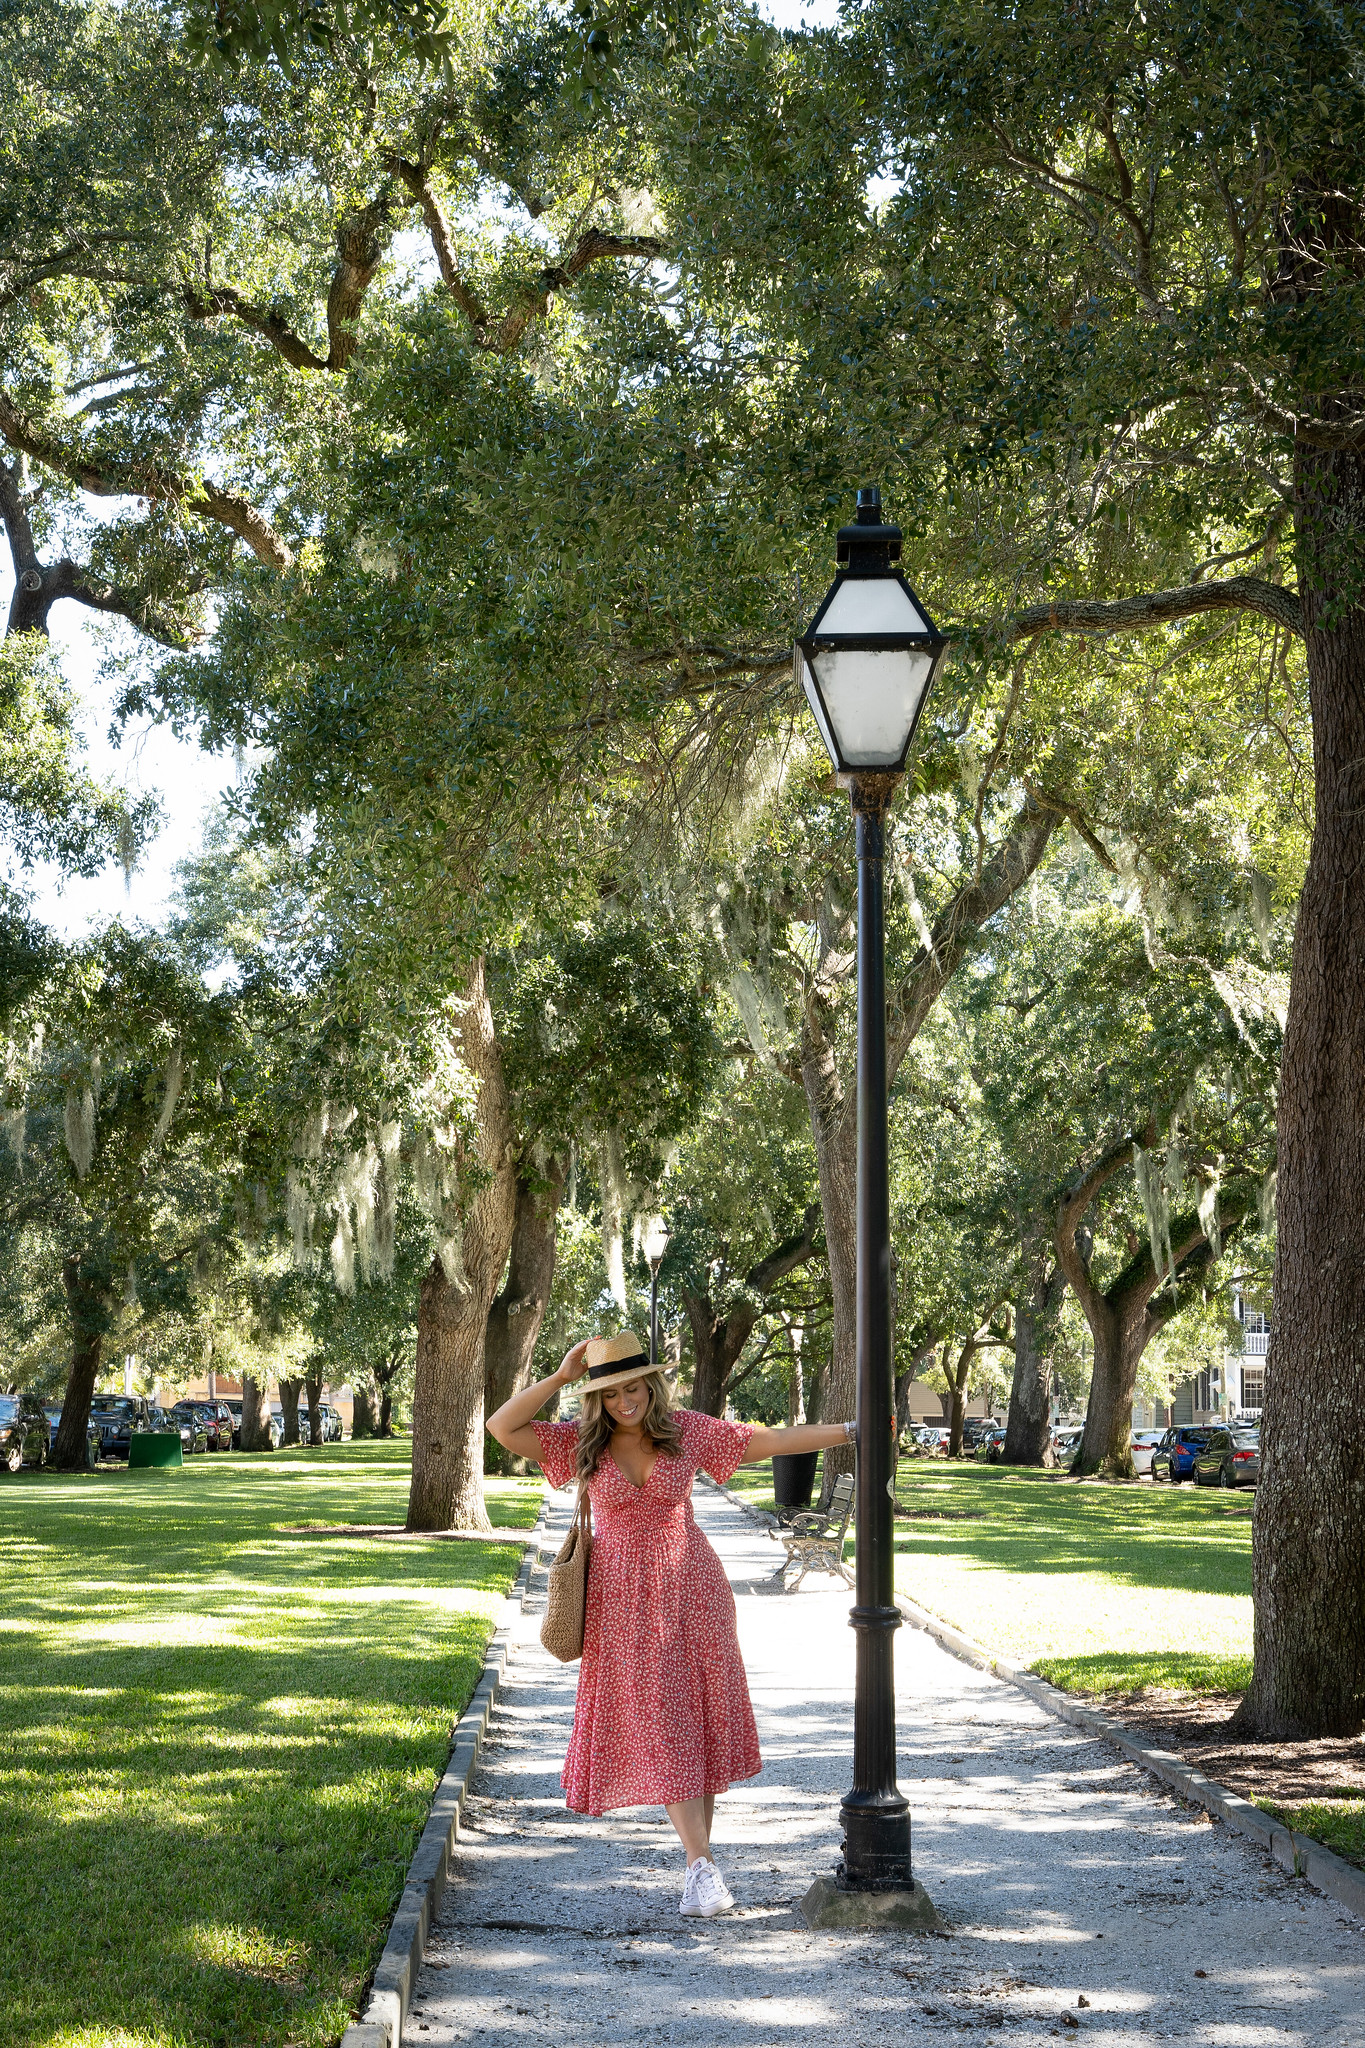 Wragg Mall Park | | A First Timer's Guide to 3 Days in Charleston South Carolina | What to do in Charleston | Charleston Travel Guide | Best Things to do in Charleston | Best Places to Visit in Charleston